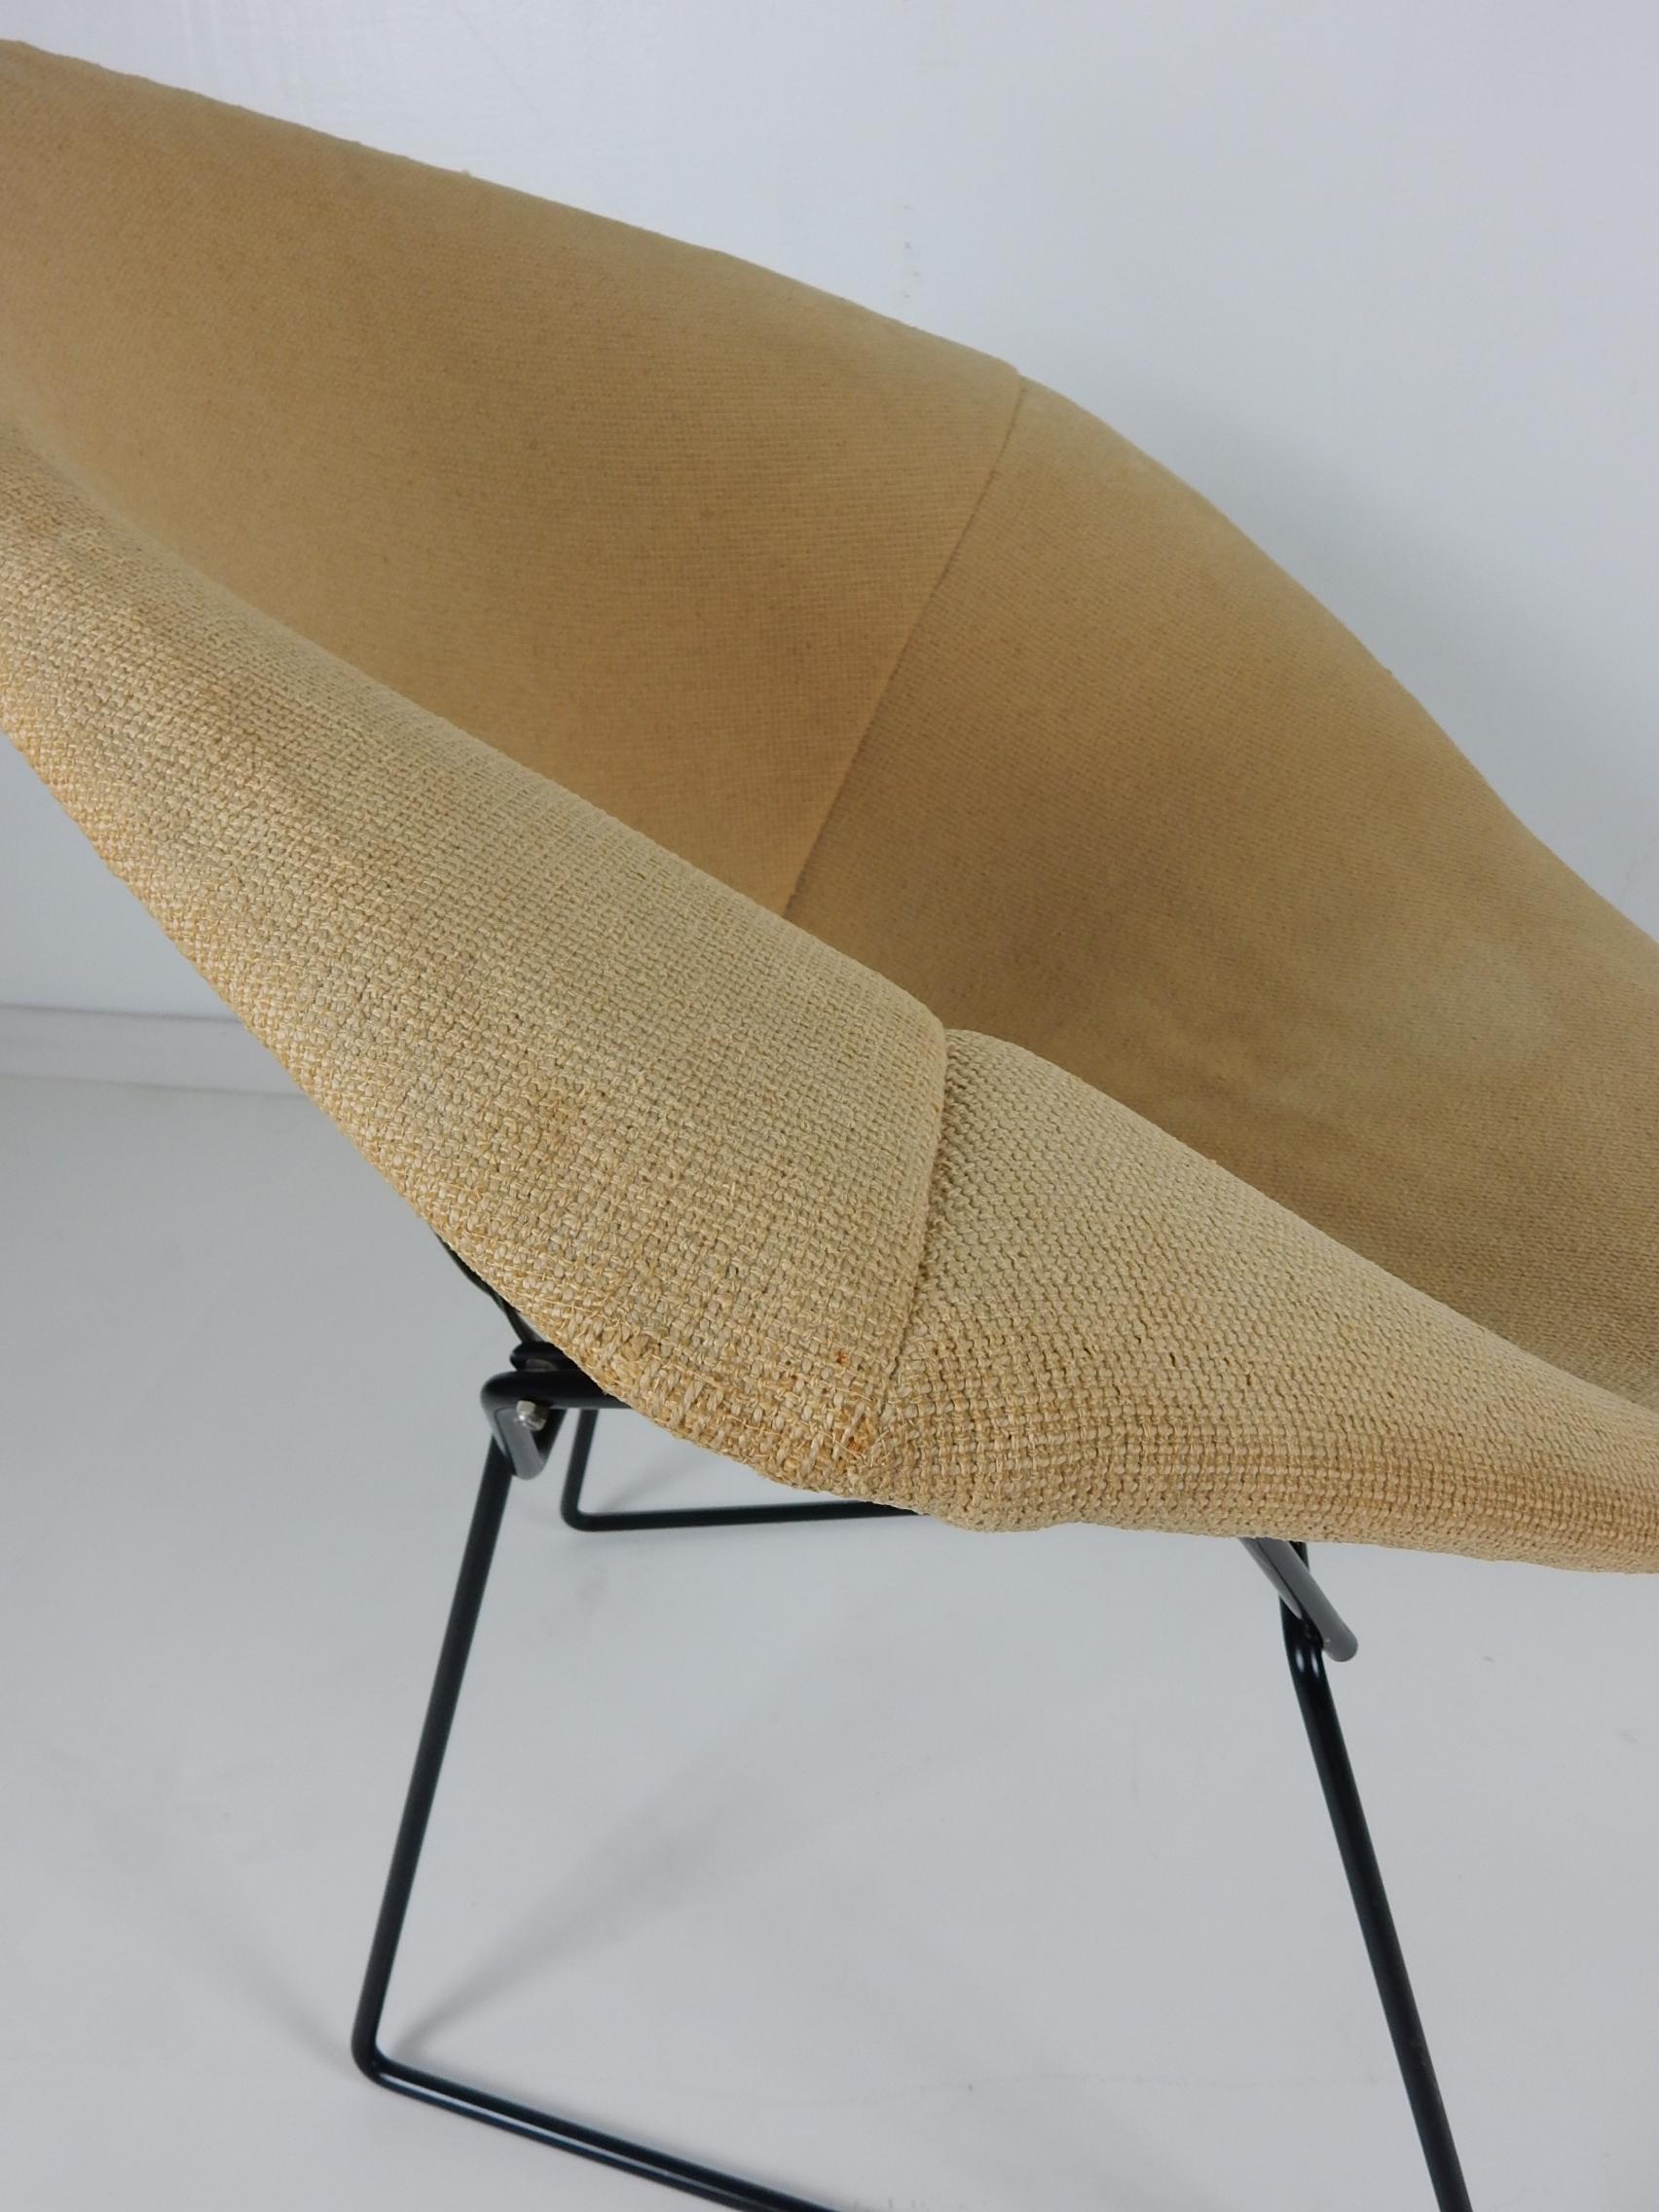 Mid-Century Modern Original 1953 Harry Bertoia Diamond Chair for H. G. Knoll Products For Sale